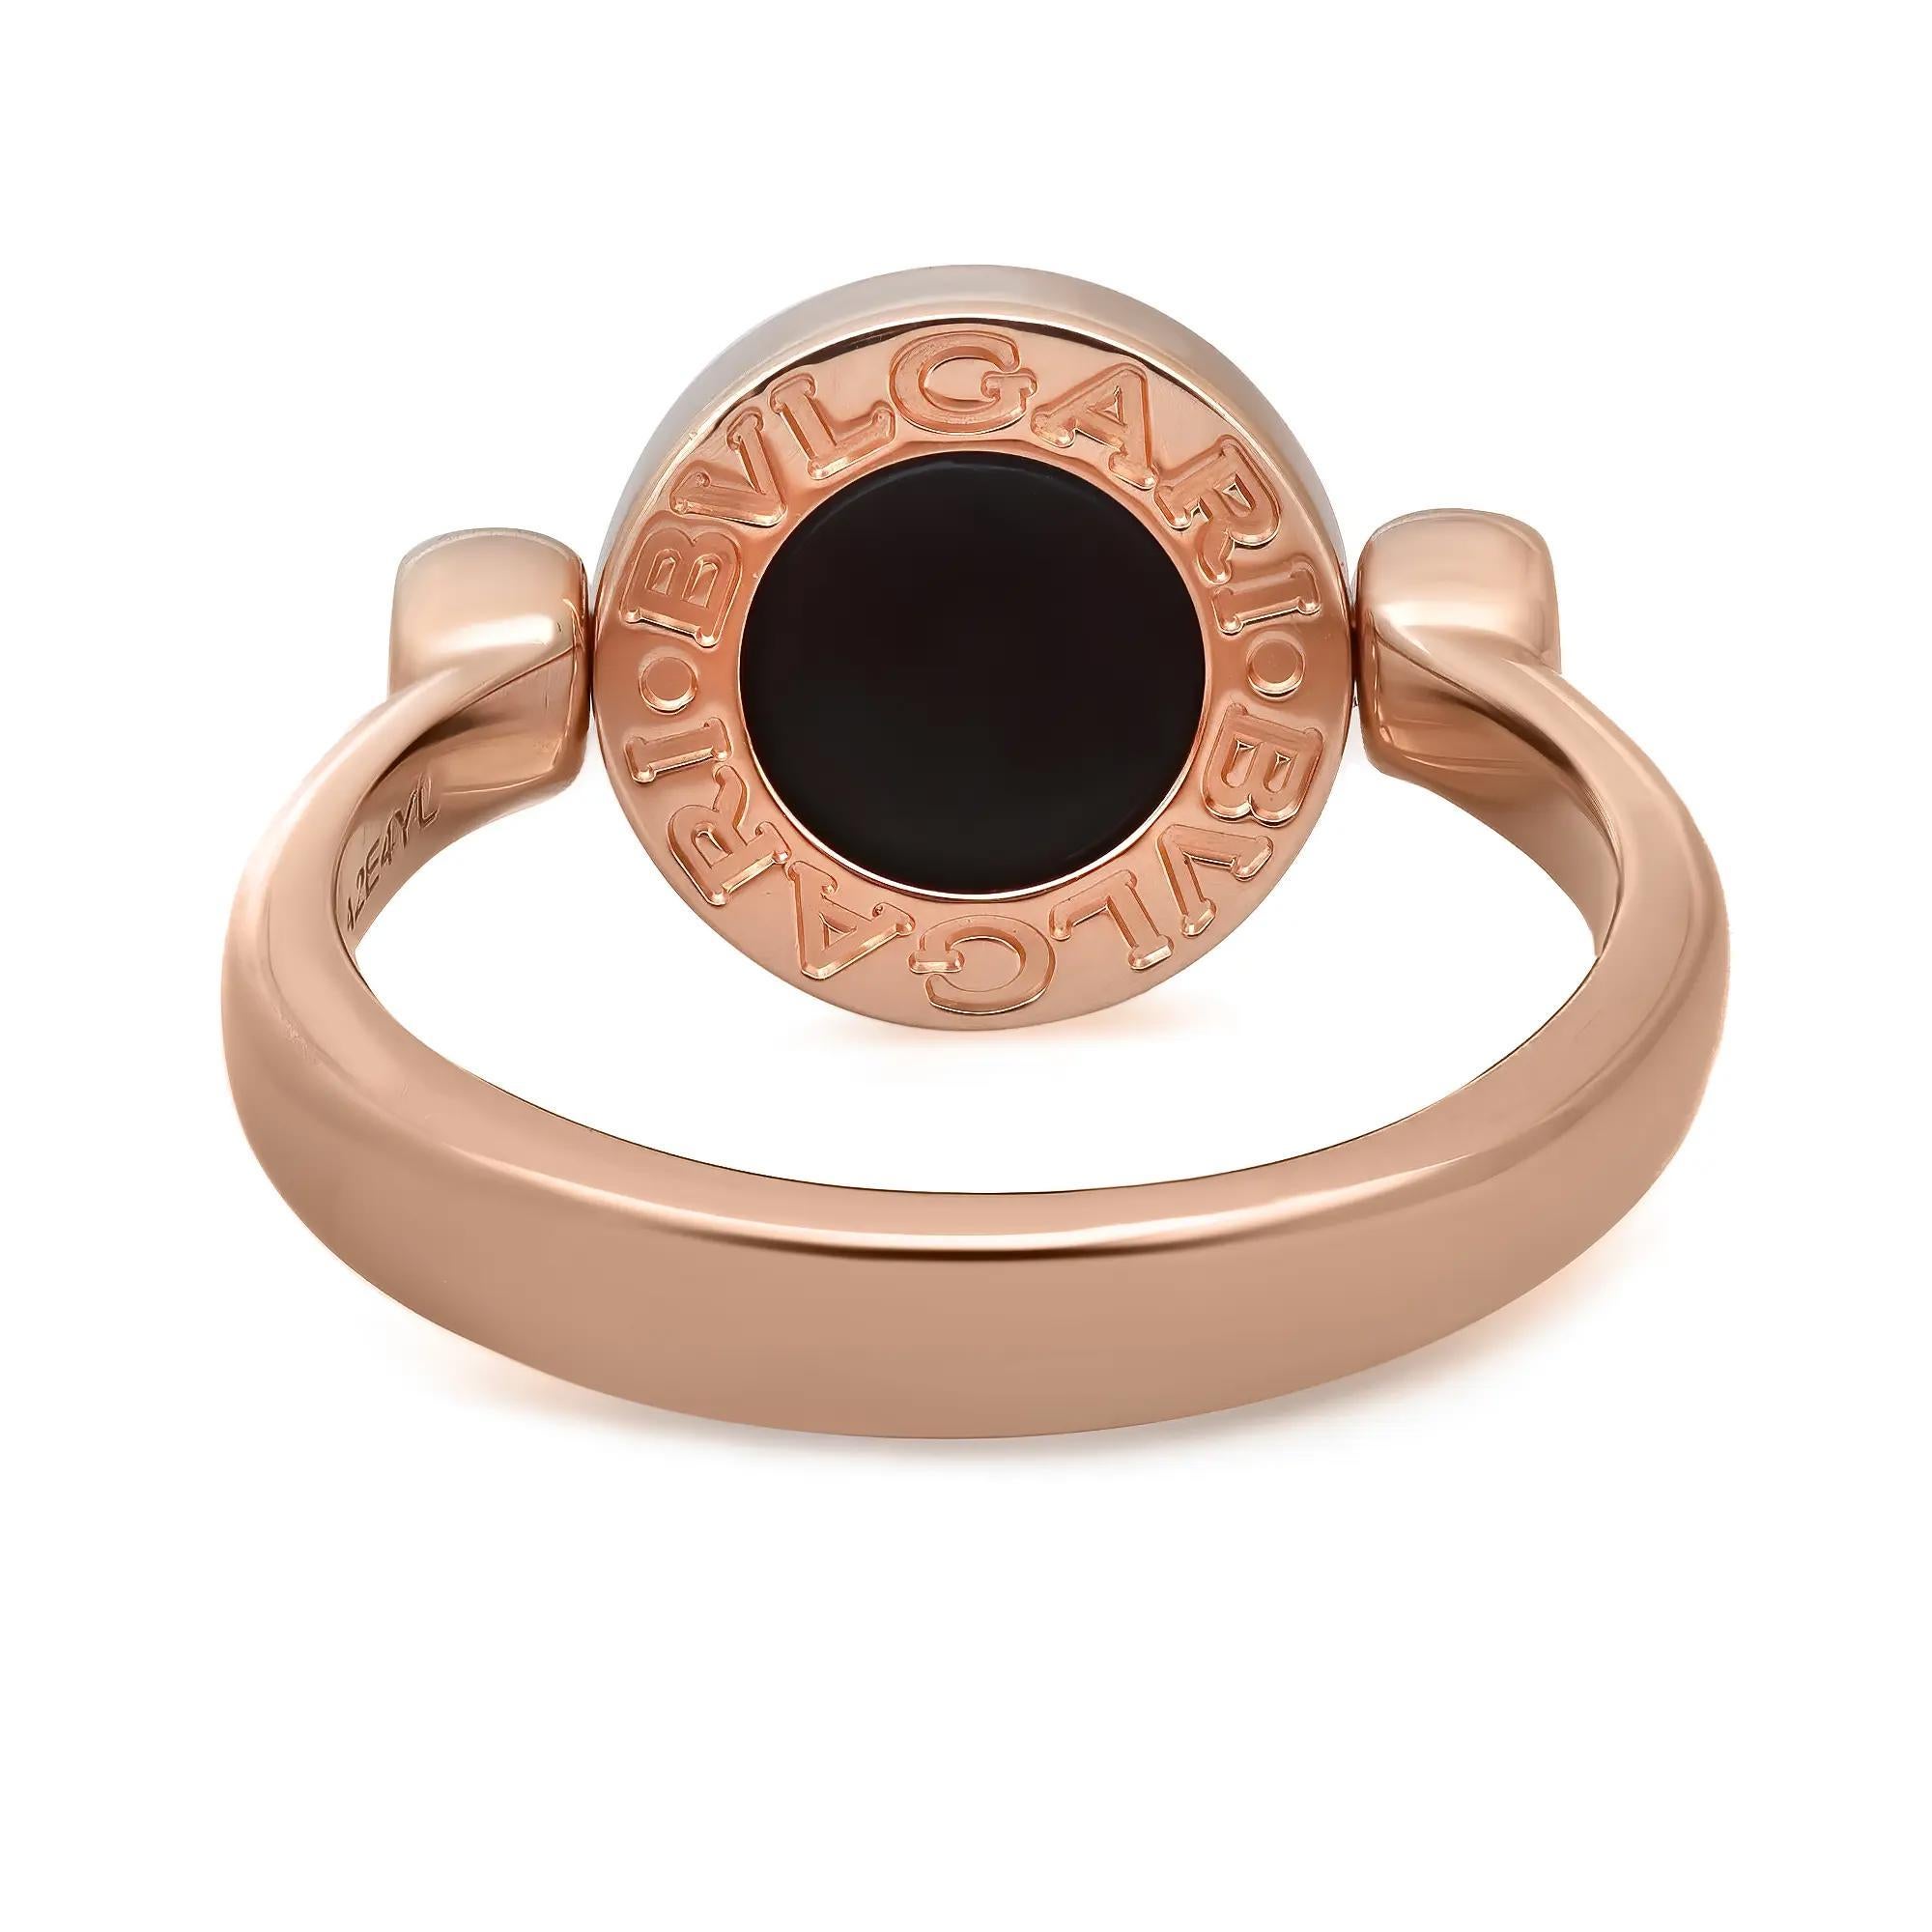 An elegant fusion of culture and modernity, the BVLGARI BVLGARI ring is an effervescent, contemporary statement of classiness. Crafted in lustrous 18K rose gold. It features a flip ring framing multicolor gemstone inserts like black Onyx and white